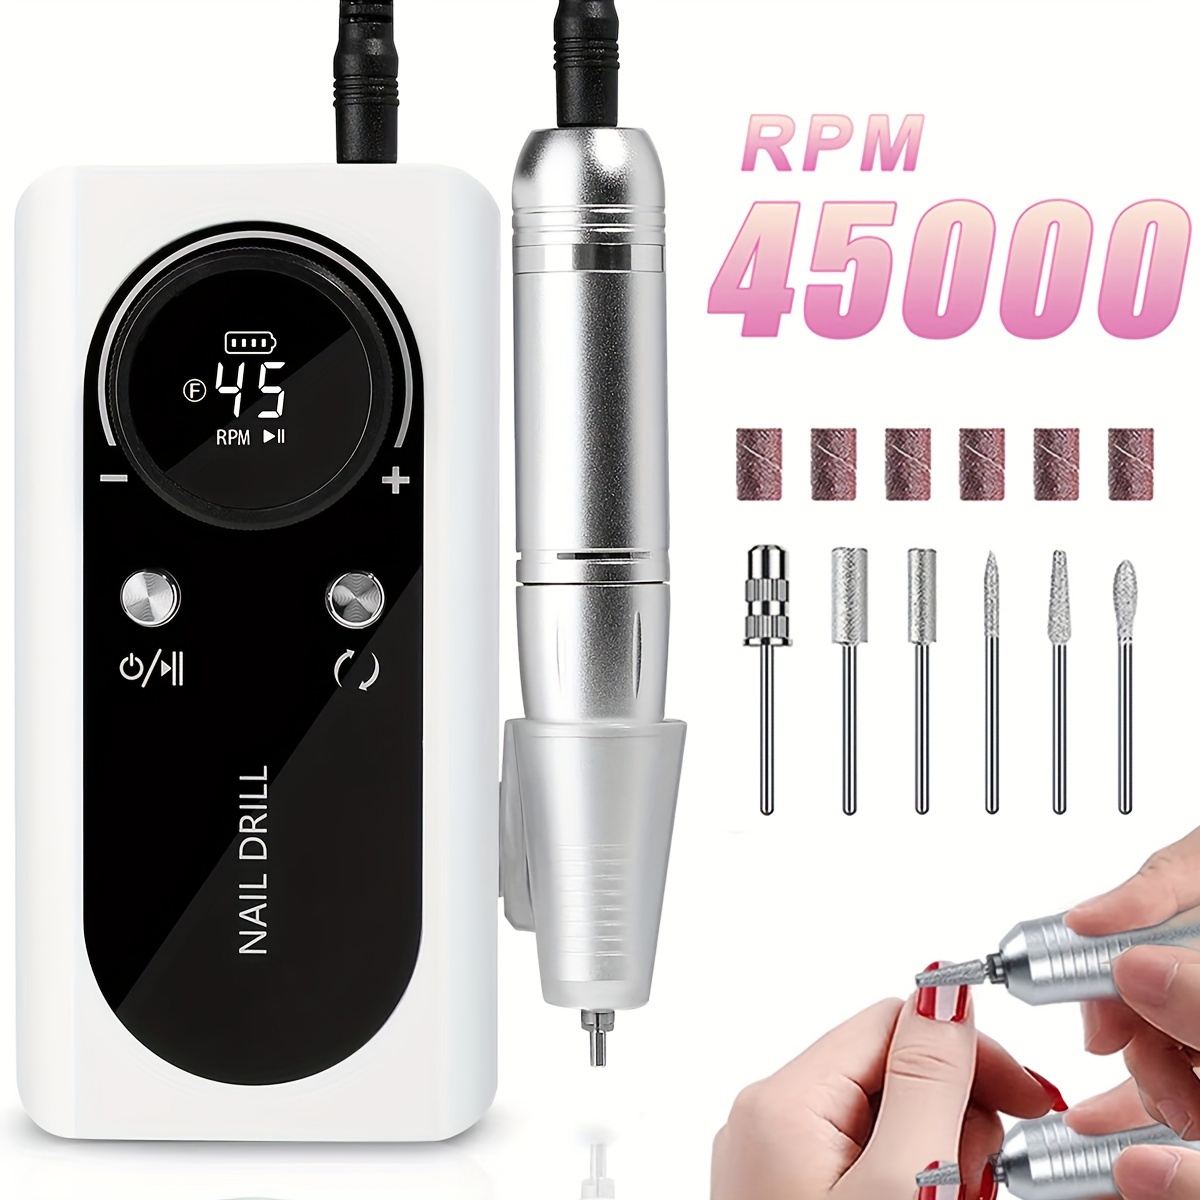 

Rechargeable Nail Drill Machine, 45000 Rpm, Electric Nail File With 6 Drill Bits & Sanding Bands, Multi-function Nail Tool With Power Bank Feature, Low Noise & Vibration, White